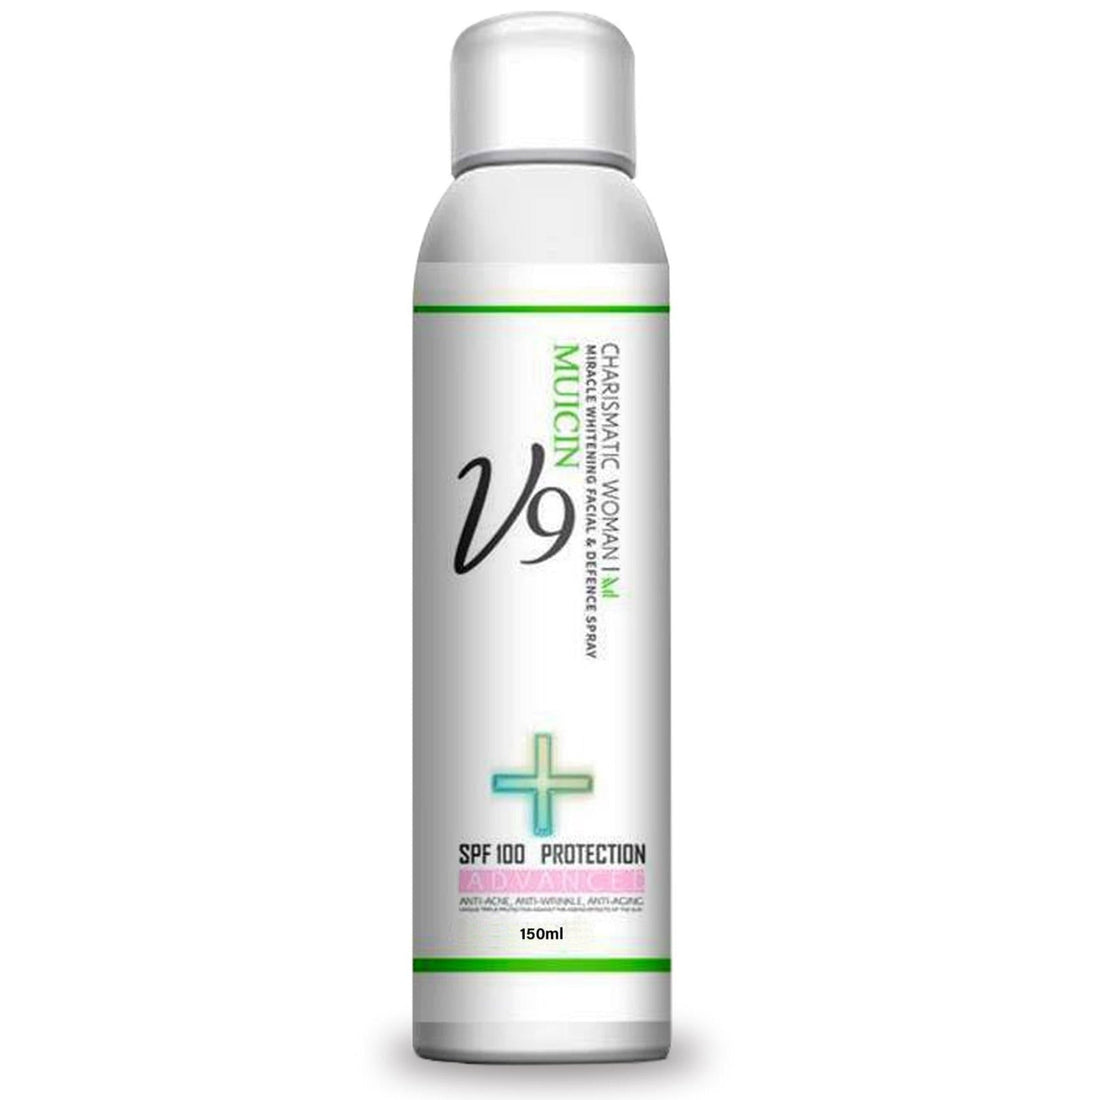 V9 INTENSIVE WHITENING &amp; PROTECTIVE FACIAL MIST - BRIGHTEN &amp; DEFEND